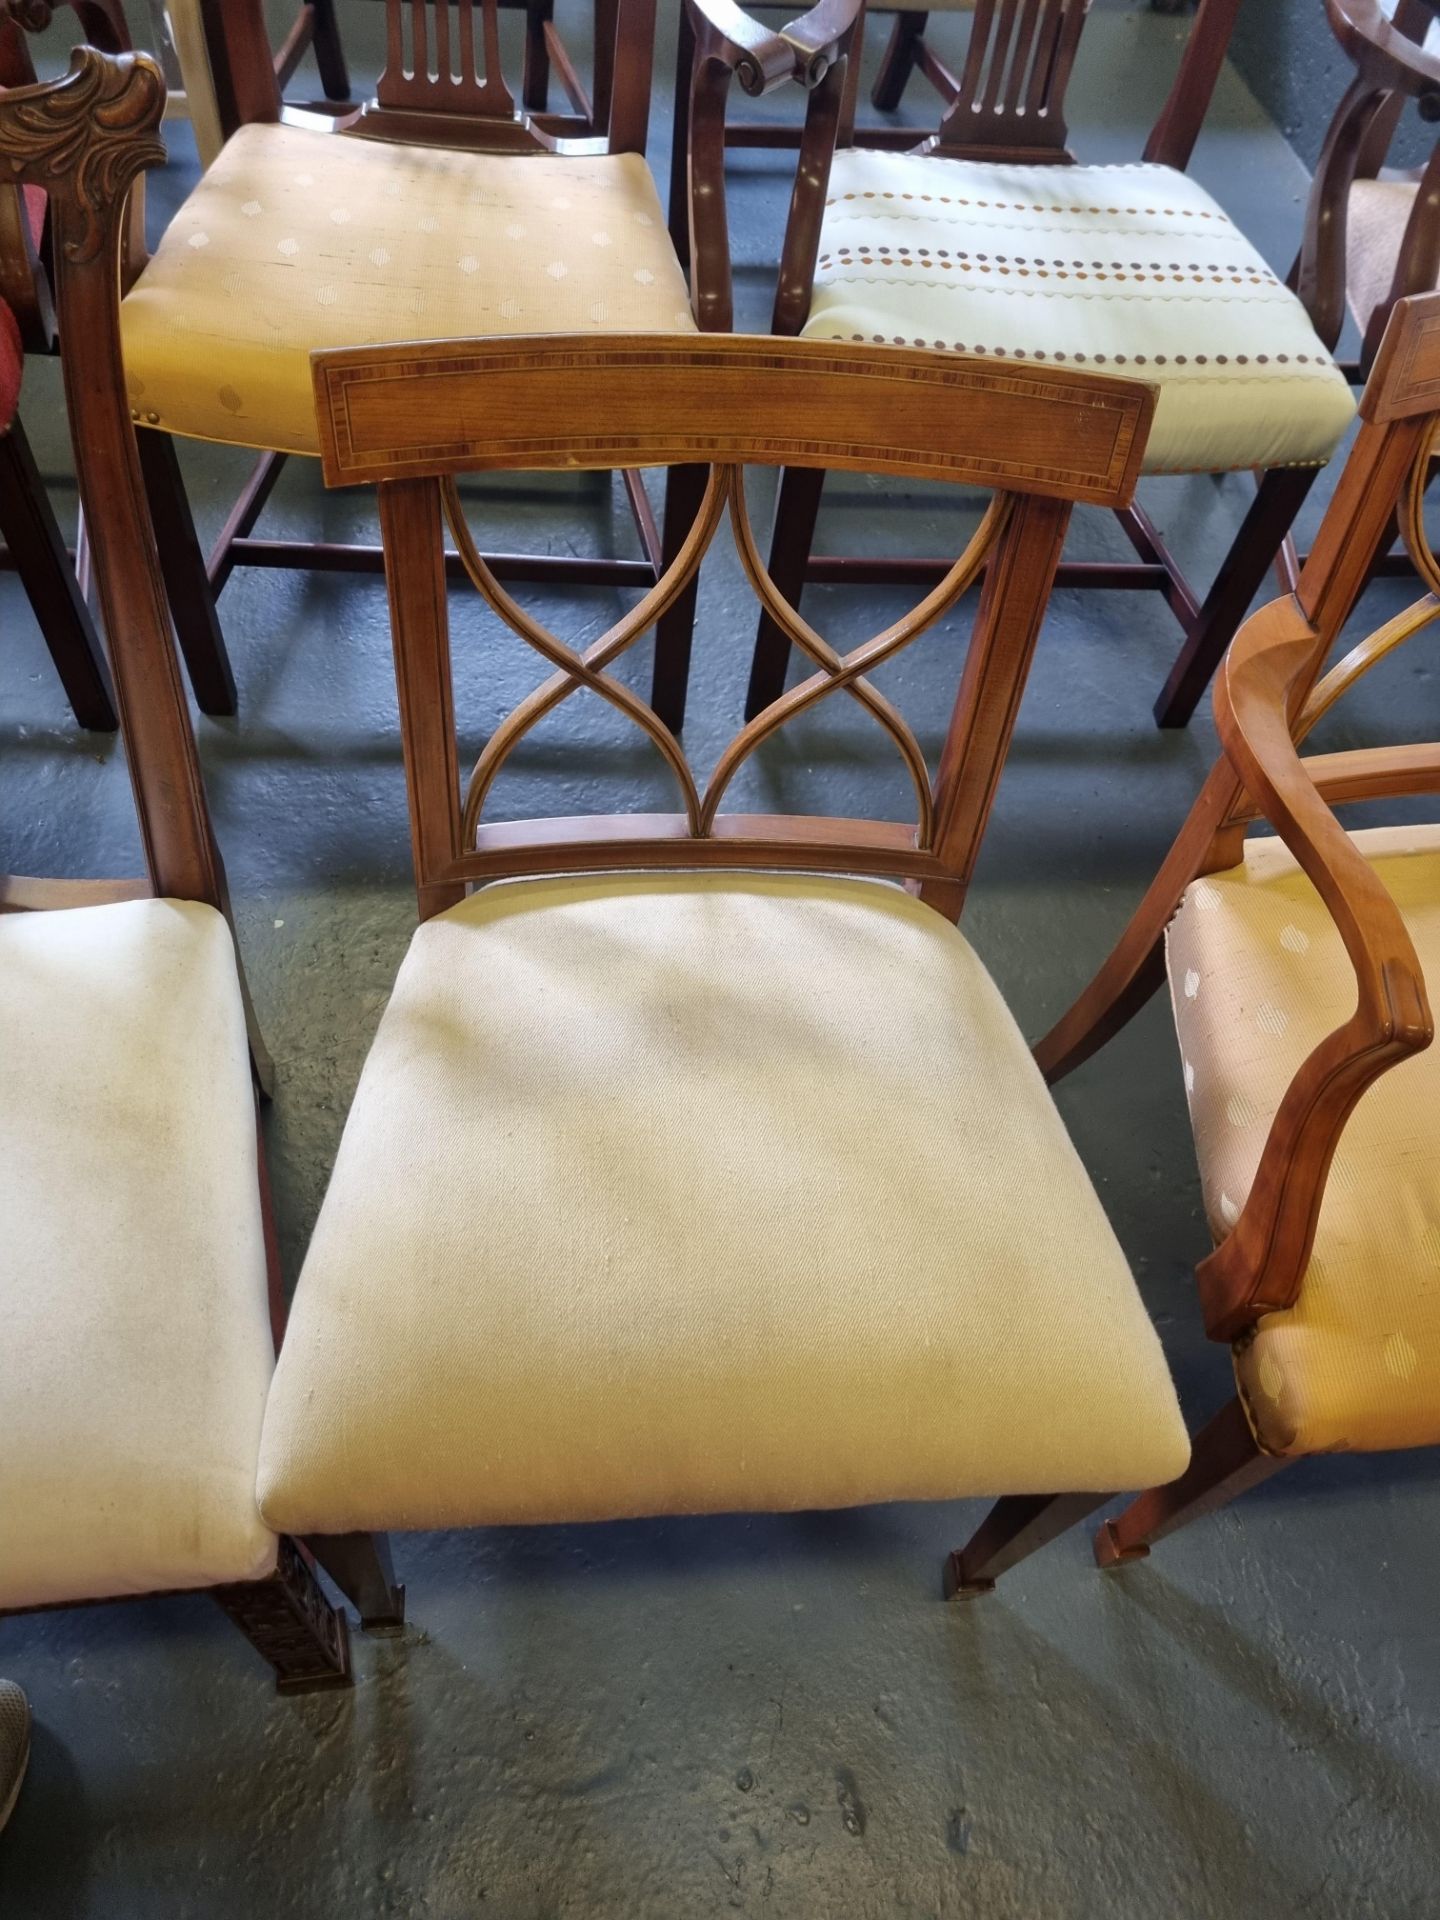 3 X Arthur Brett Sheraton-Style Cherrywood Upholstered Dining Chairs With Tulip-Wood Inlay In The - Image 5 of 5